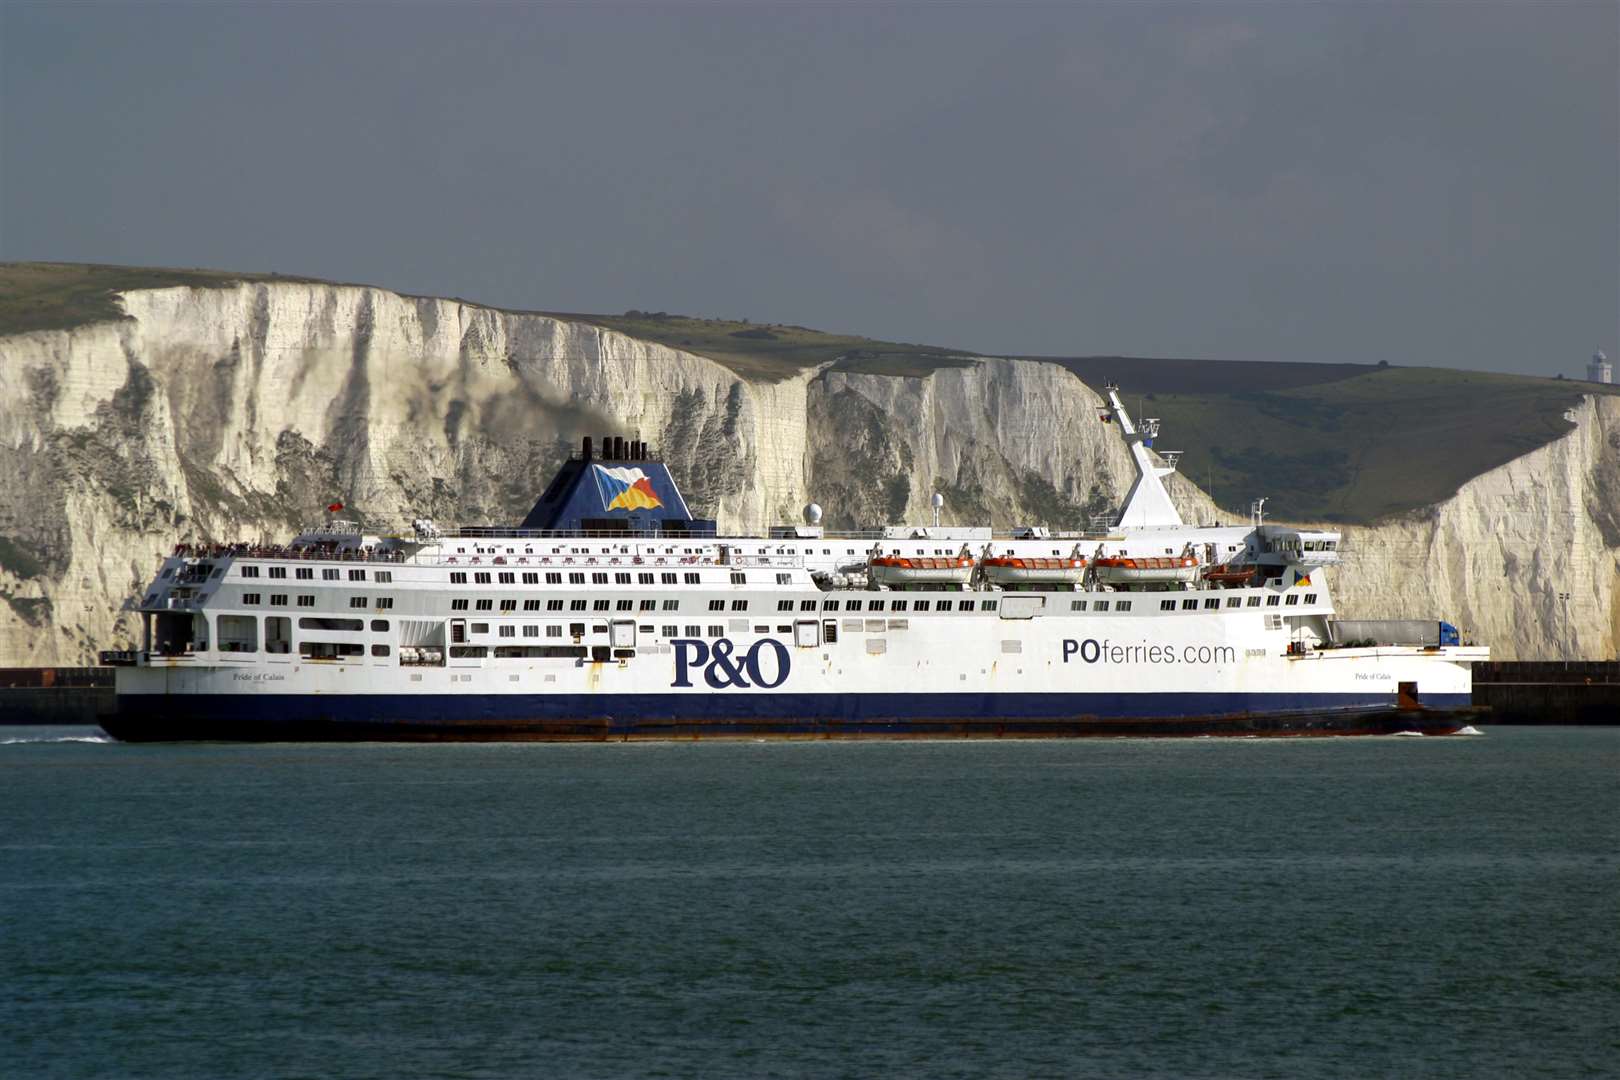 The RMT may ballot its members on strike action after a meeting with P&O Ferries on Friday